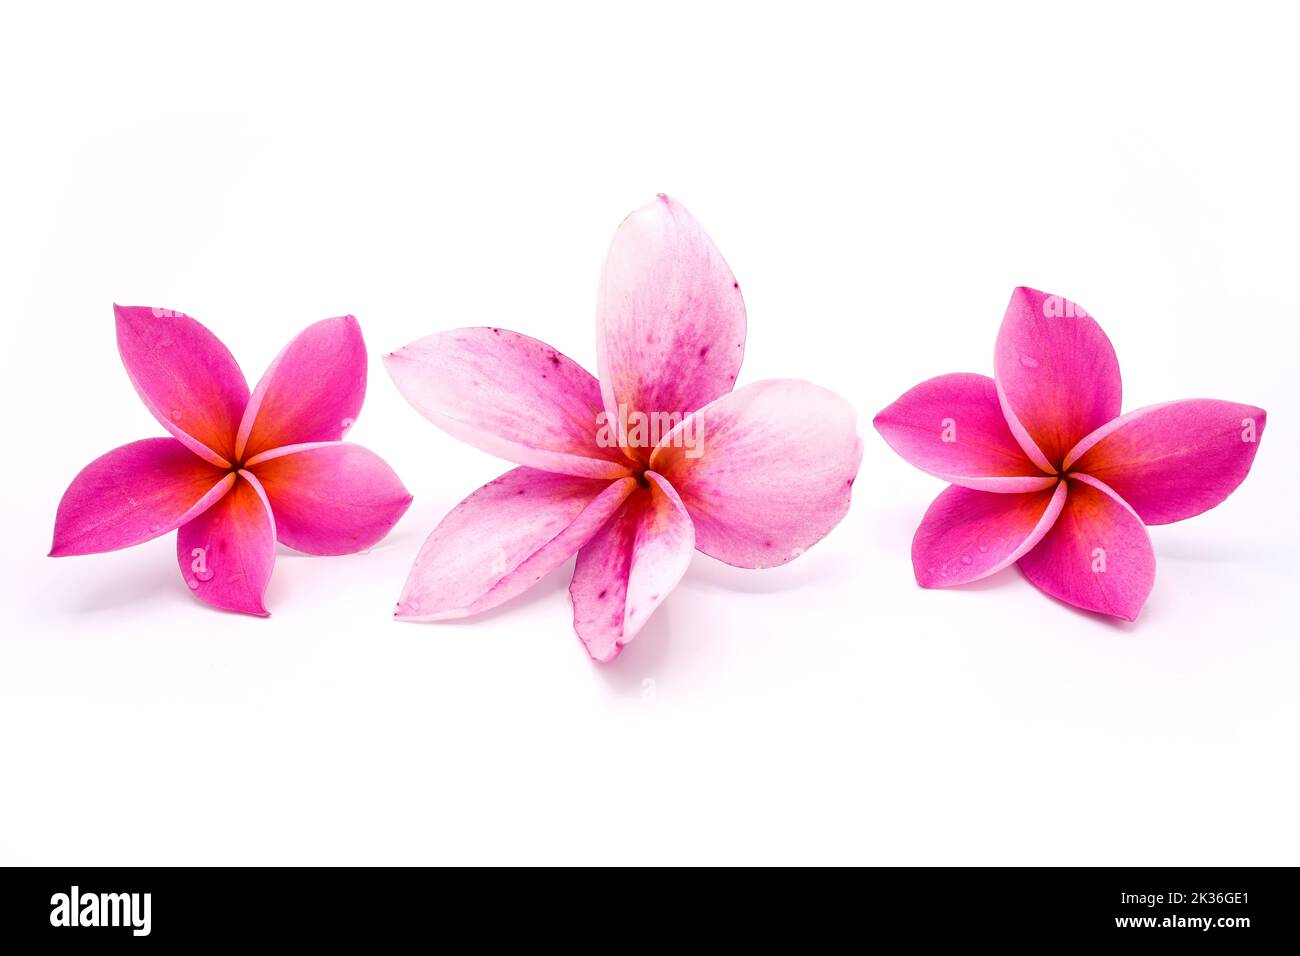 The pink frangipani flowers isolated on a white background Stock Photo